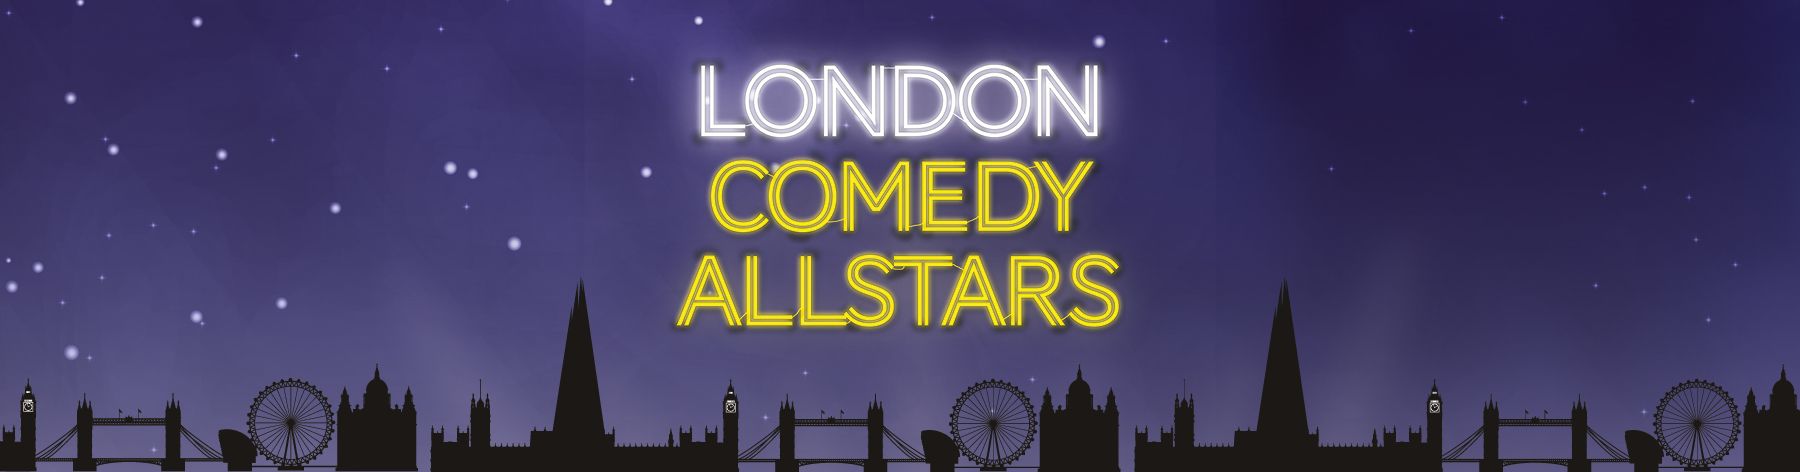 Friday night will be your favourite night out with comedy from the best in the business. Buy London Comedy Allstars tickets.